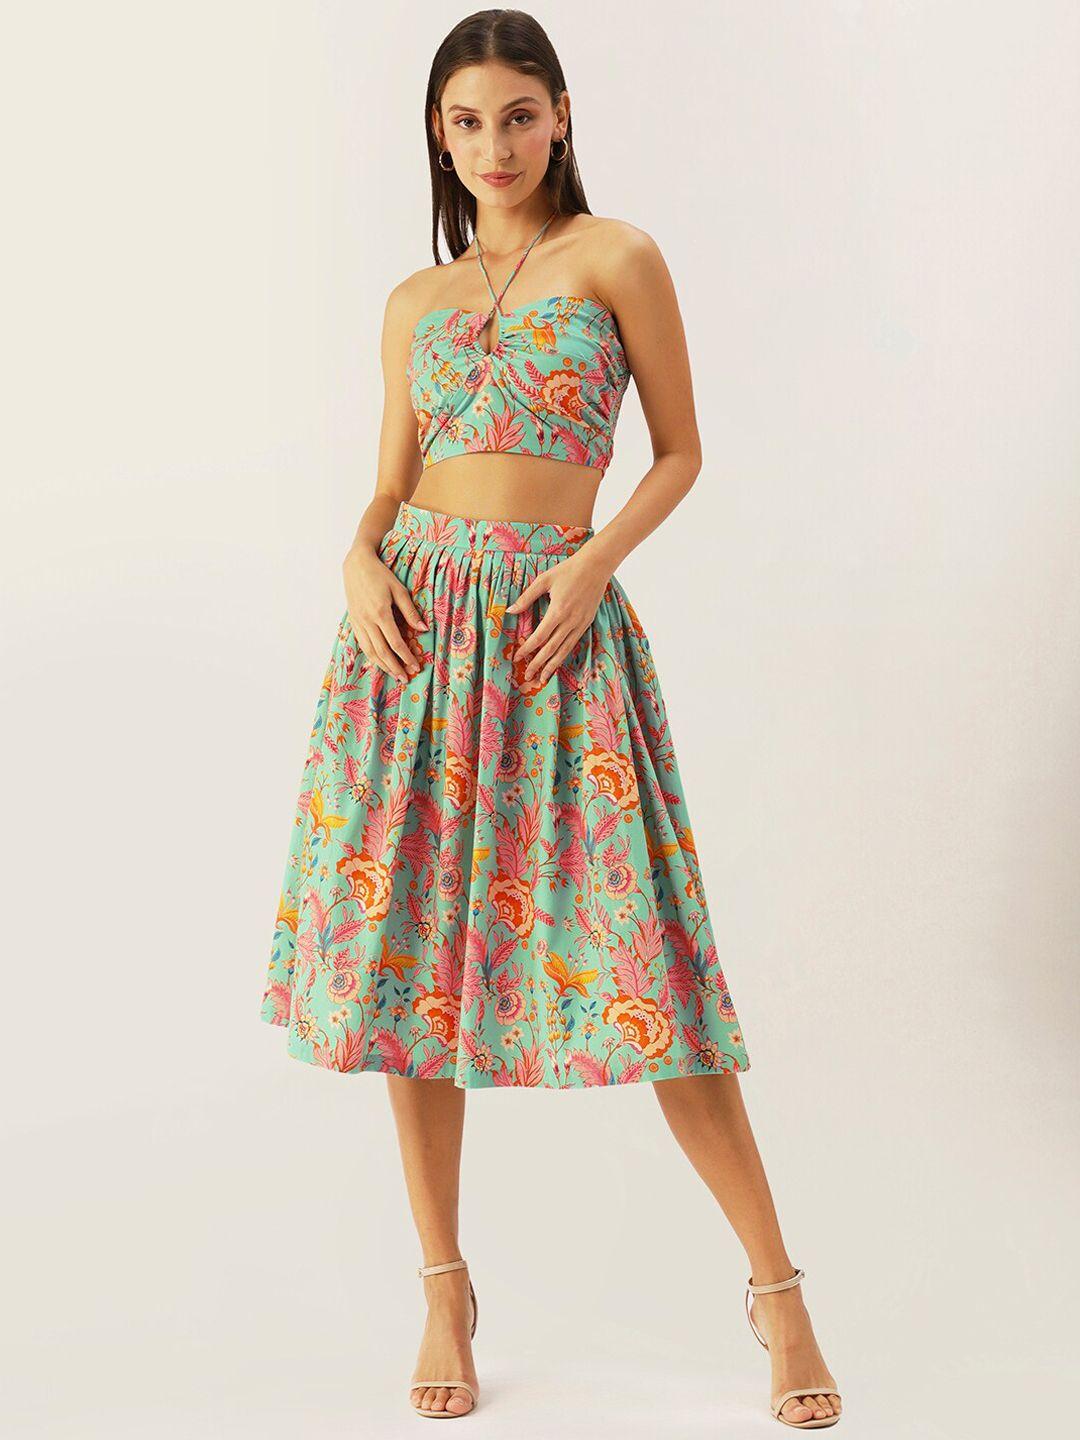 4wrd by dressberry women sea green & pink printed co-ords